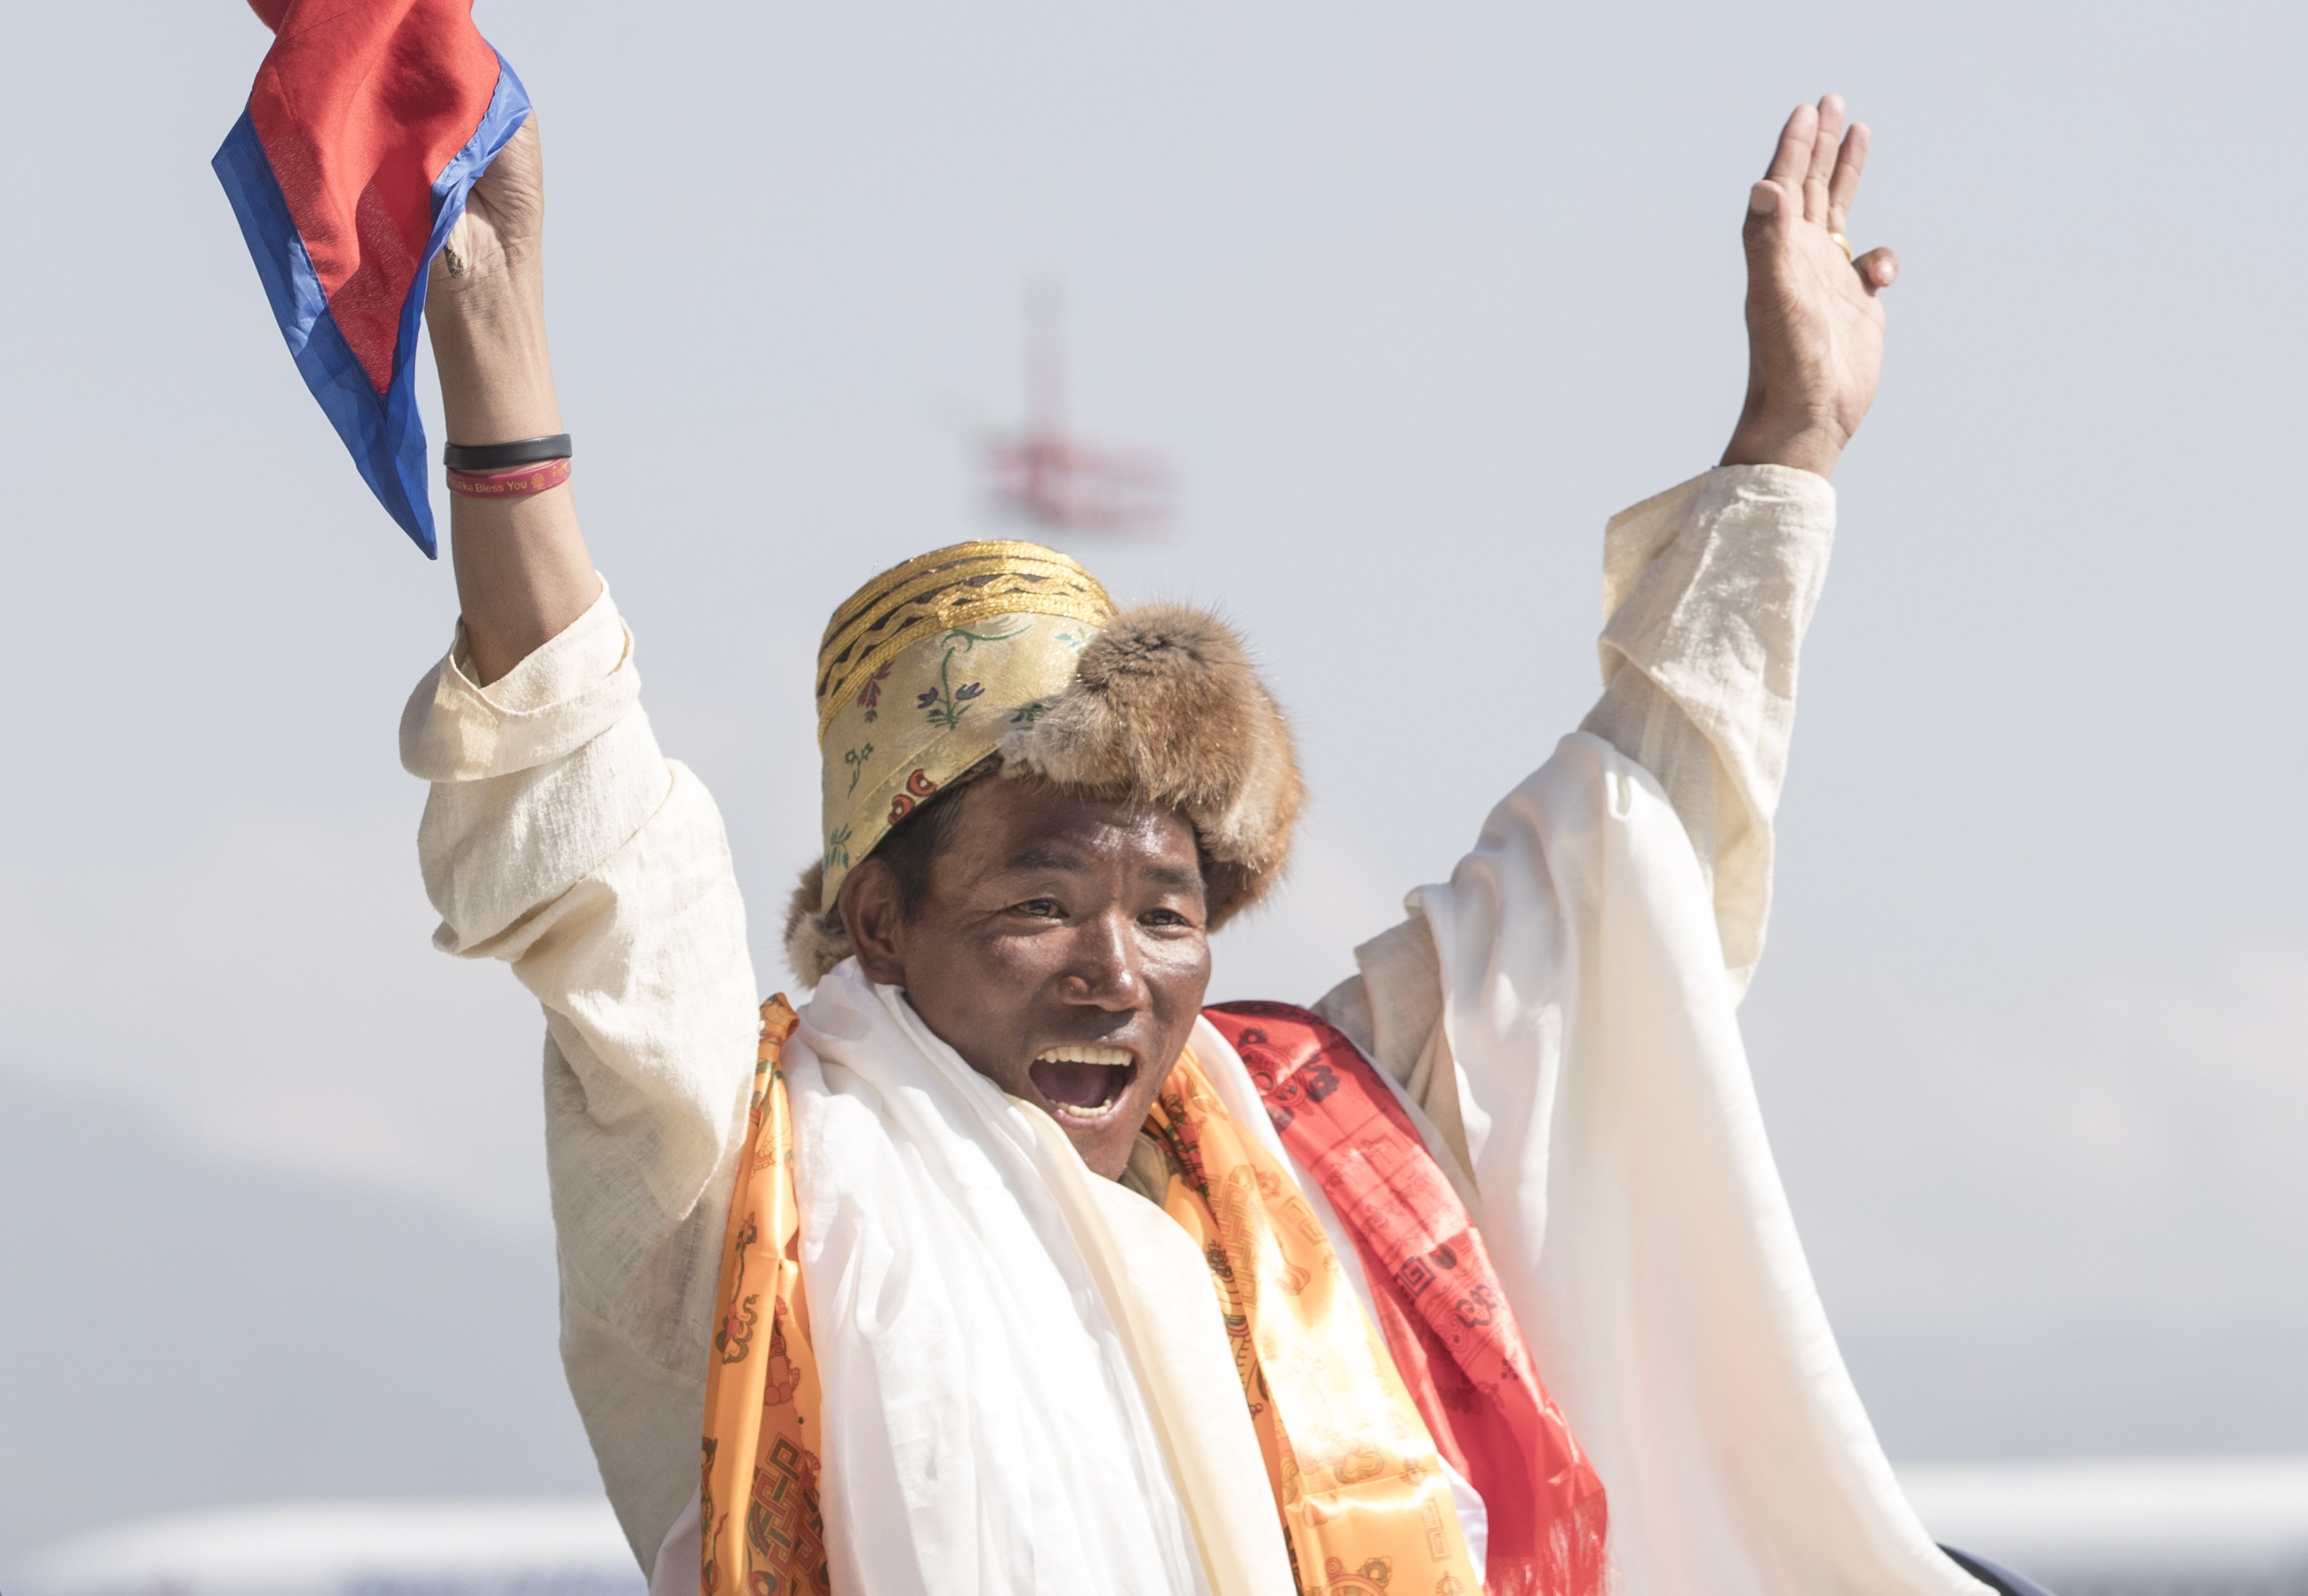 Nepalese veteran mountaineer Kami Rita Sherpa has successfully climbed Mount Everest 26 times setting a new world record for climbing the world’s tallest peak. Photo: EPA-EFE/file